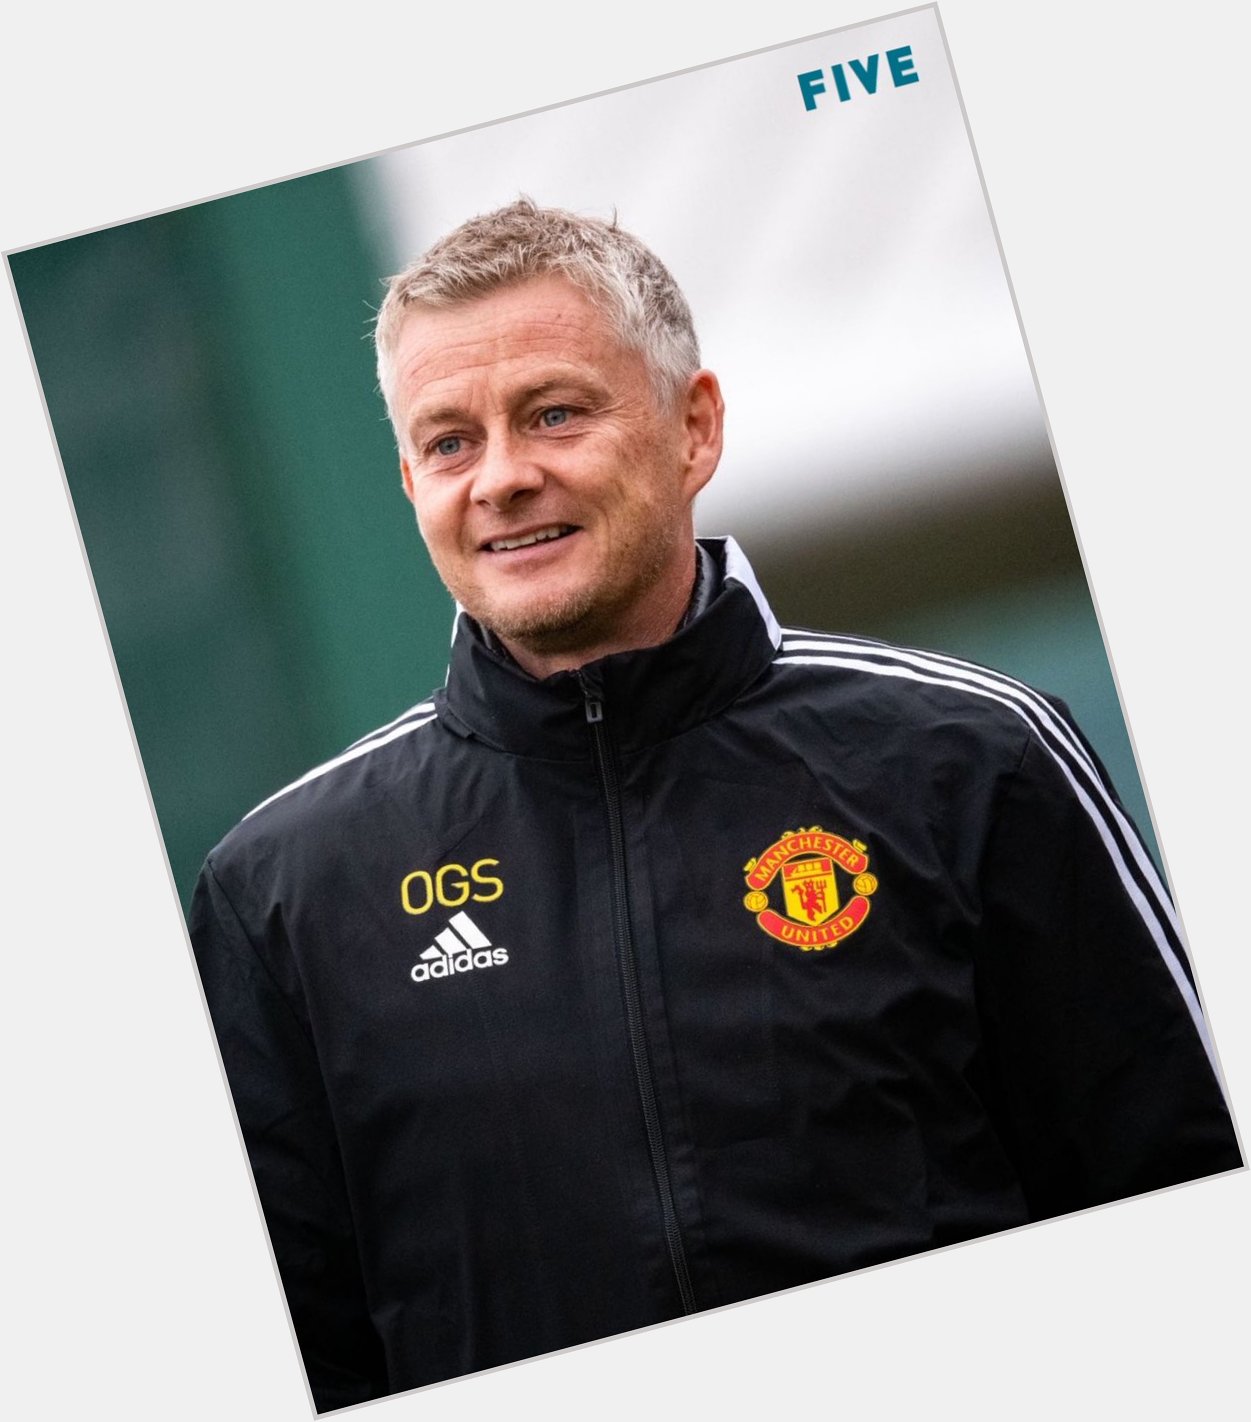   Happy Birthday to former Manchester United Striker and Manager, Ole Gunnar Solskjaer!

Have a great day Ole! 